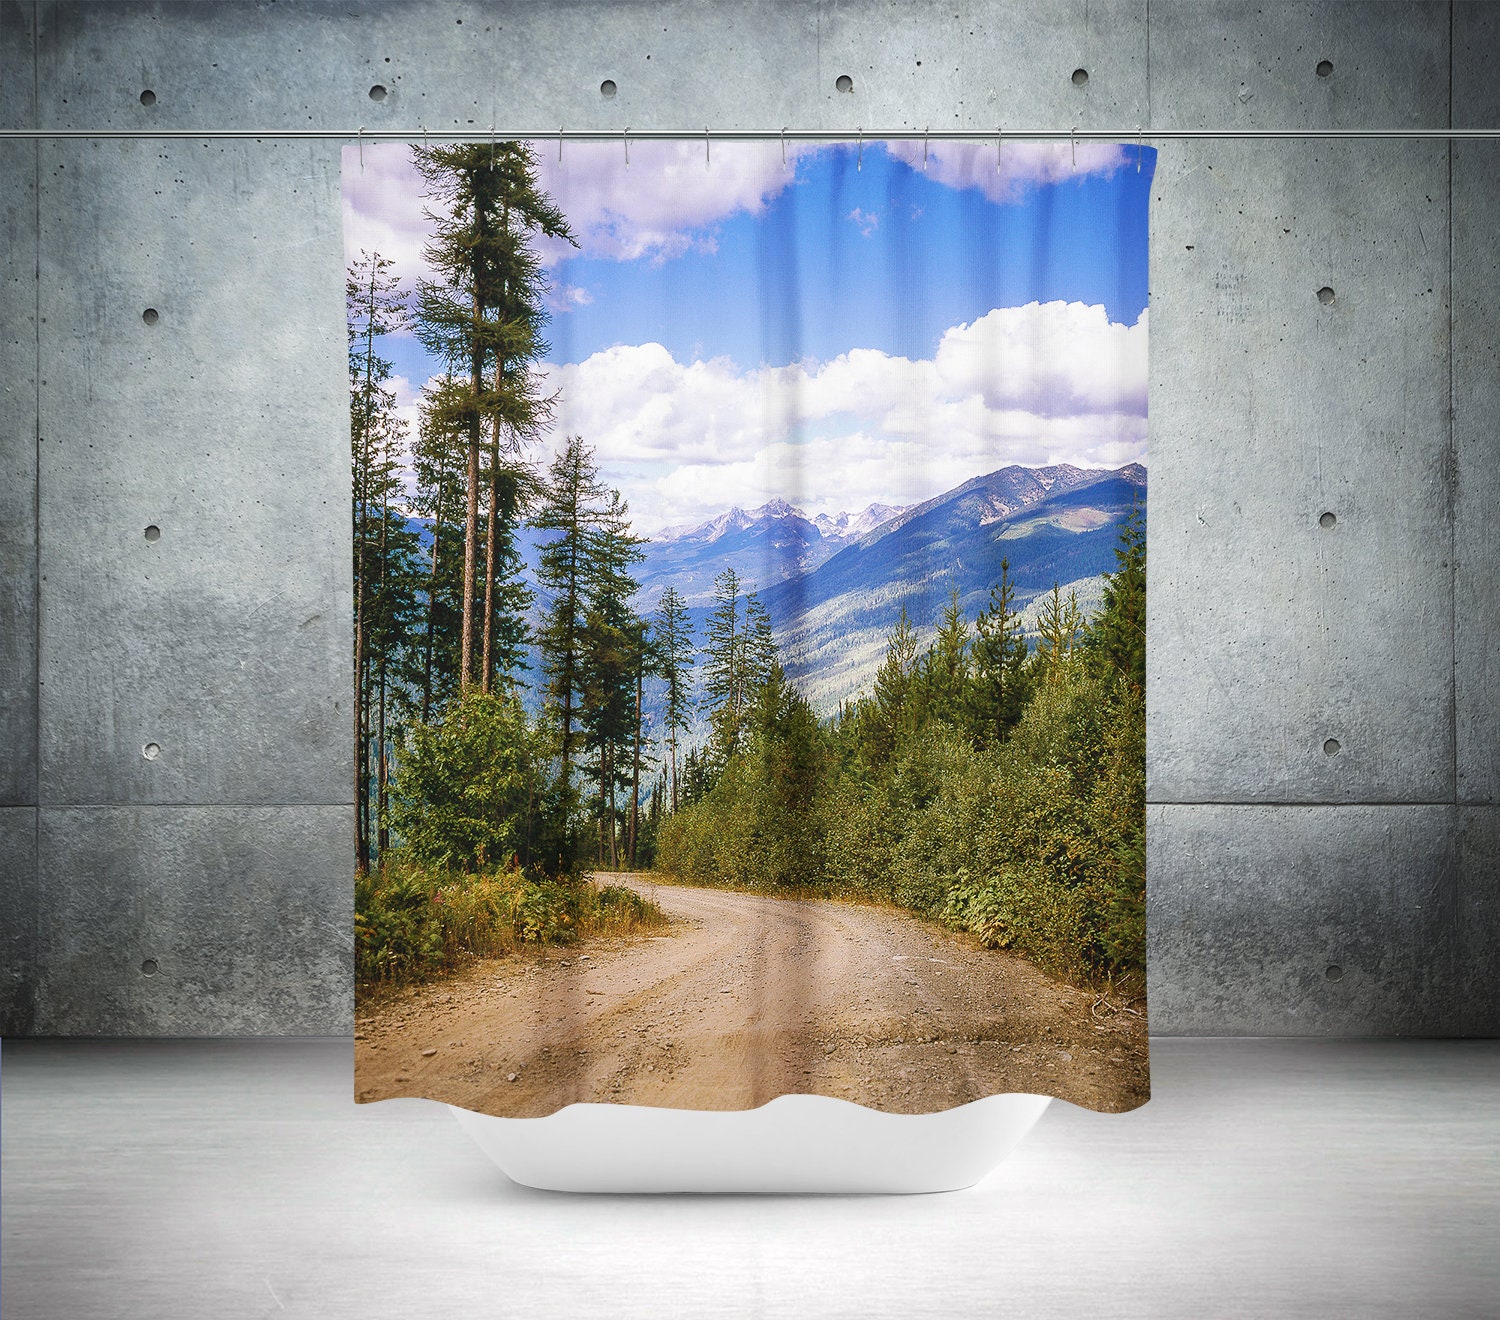 Scenic Mountains Shower Curtain 71x74 inch - in (180x188cm)